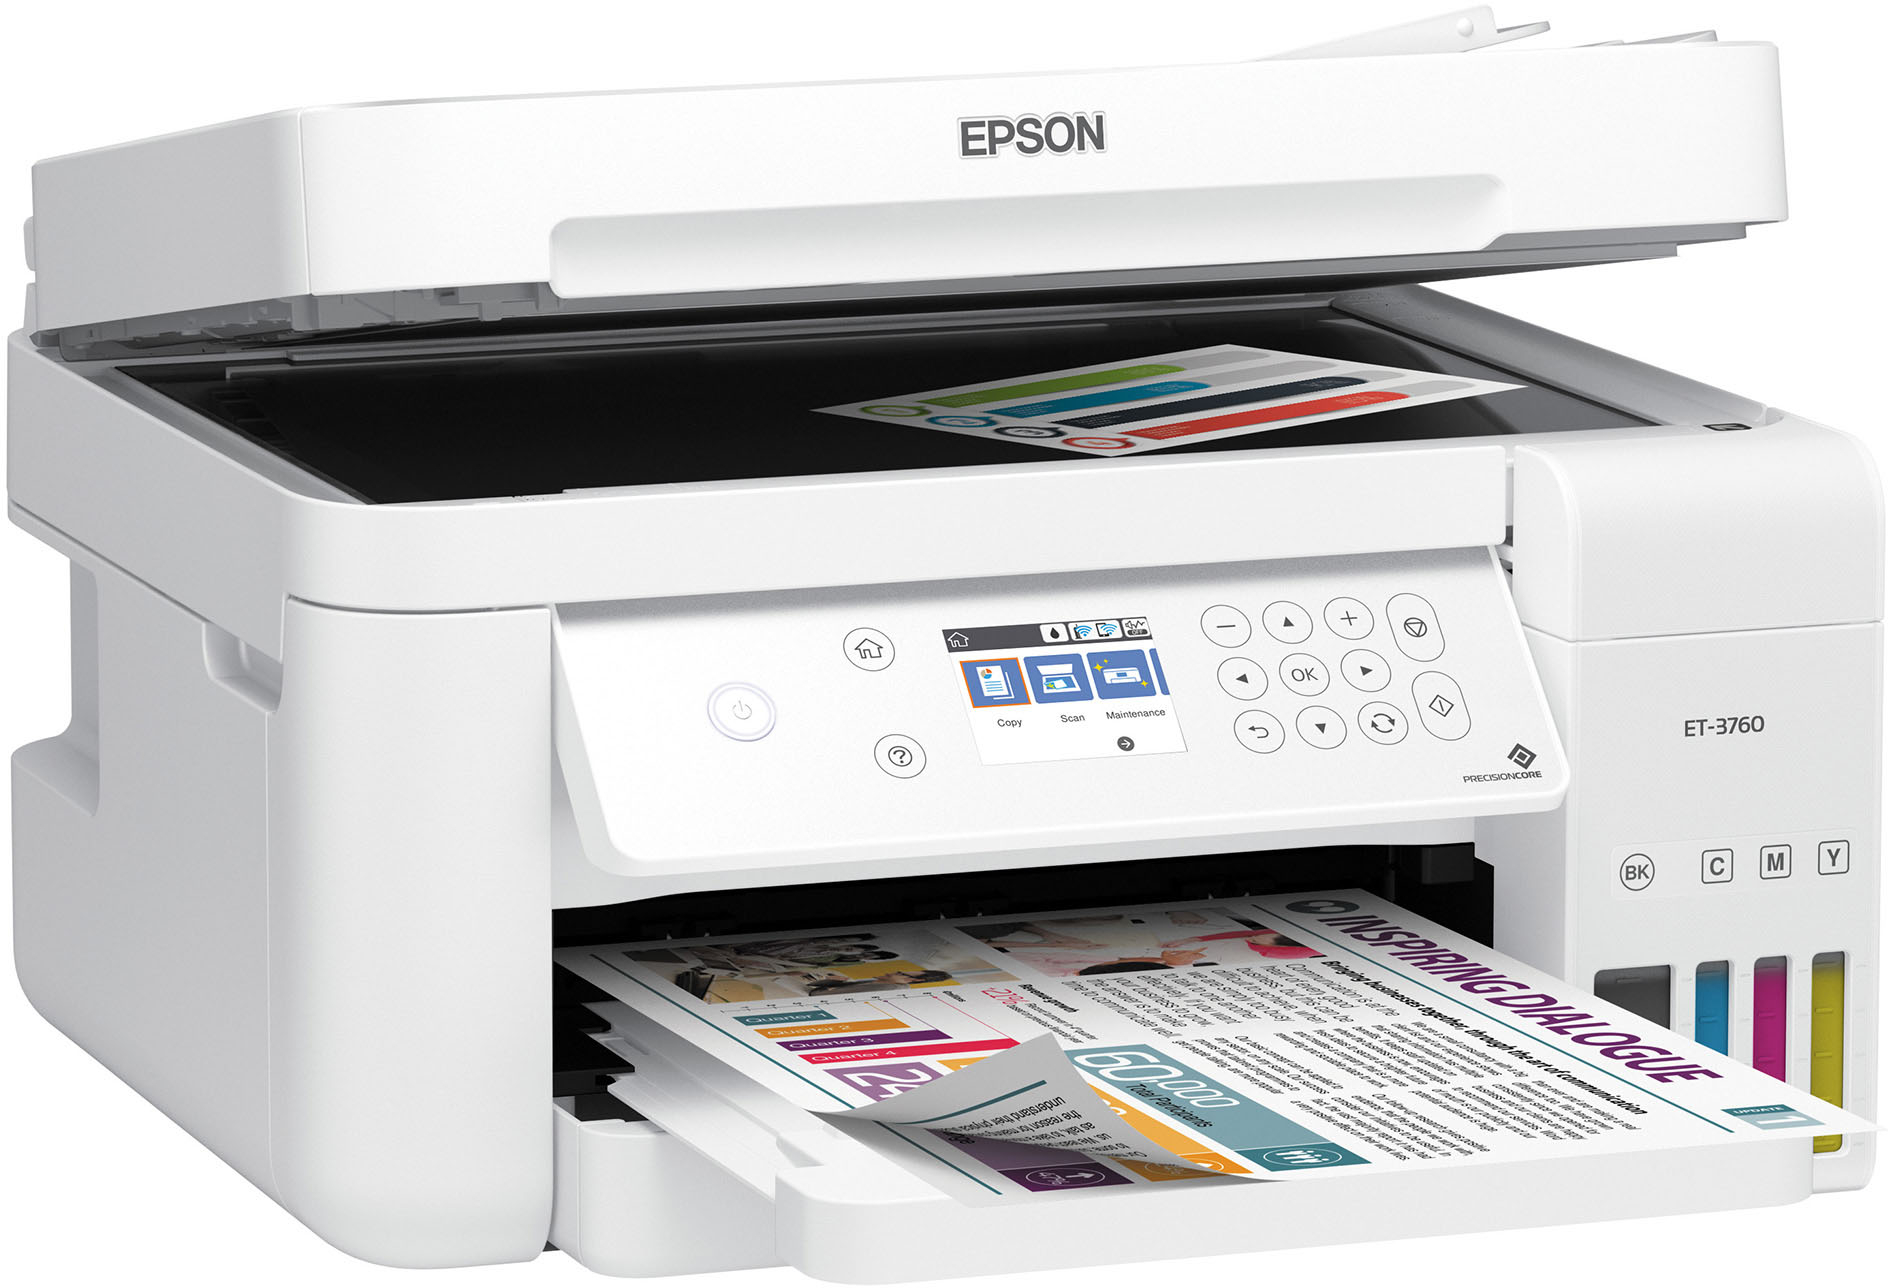 Angle View: Epson - ET-3760 All-In-One Cartridge-Free Supertank Printer Refurb - White